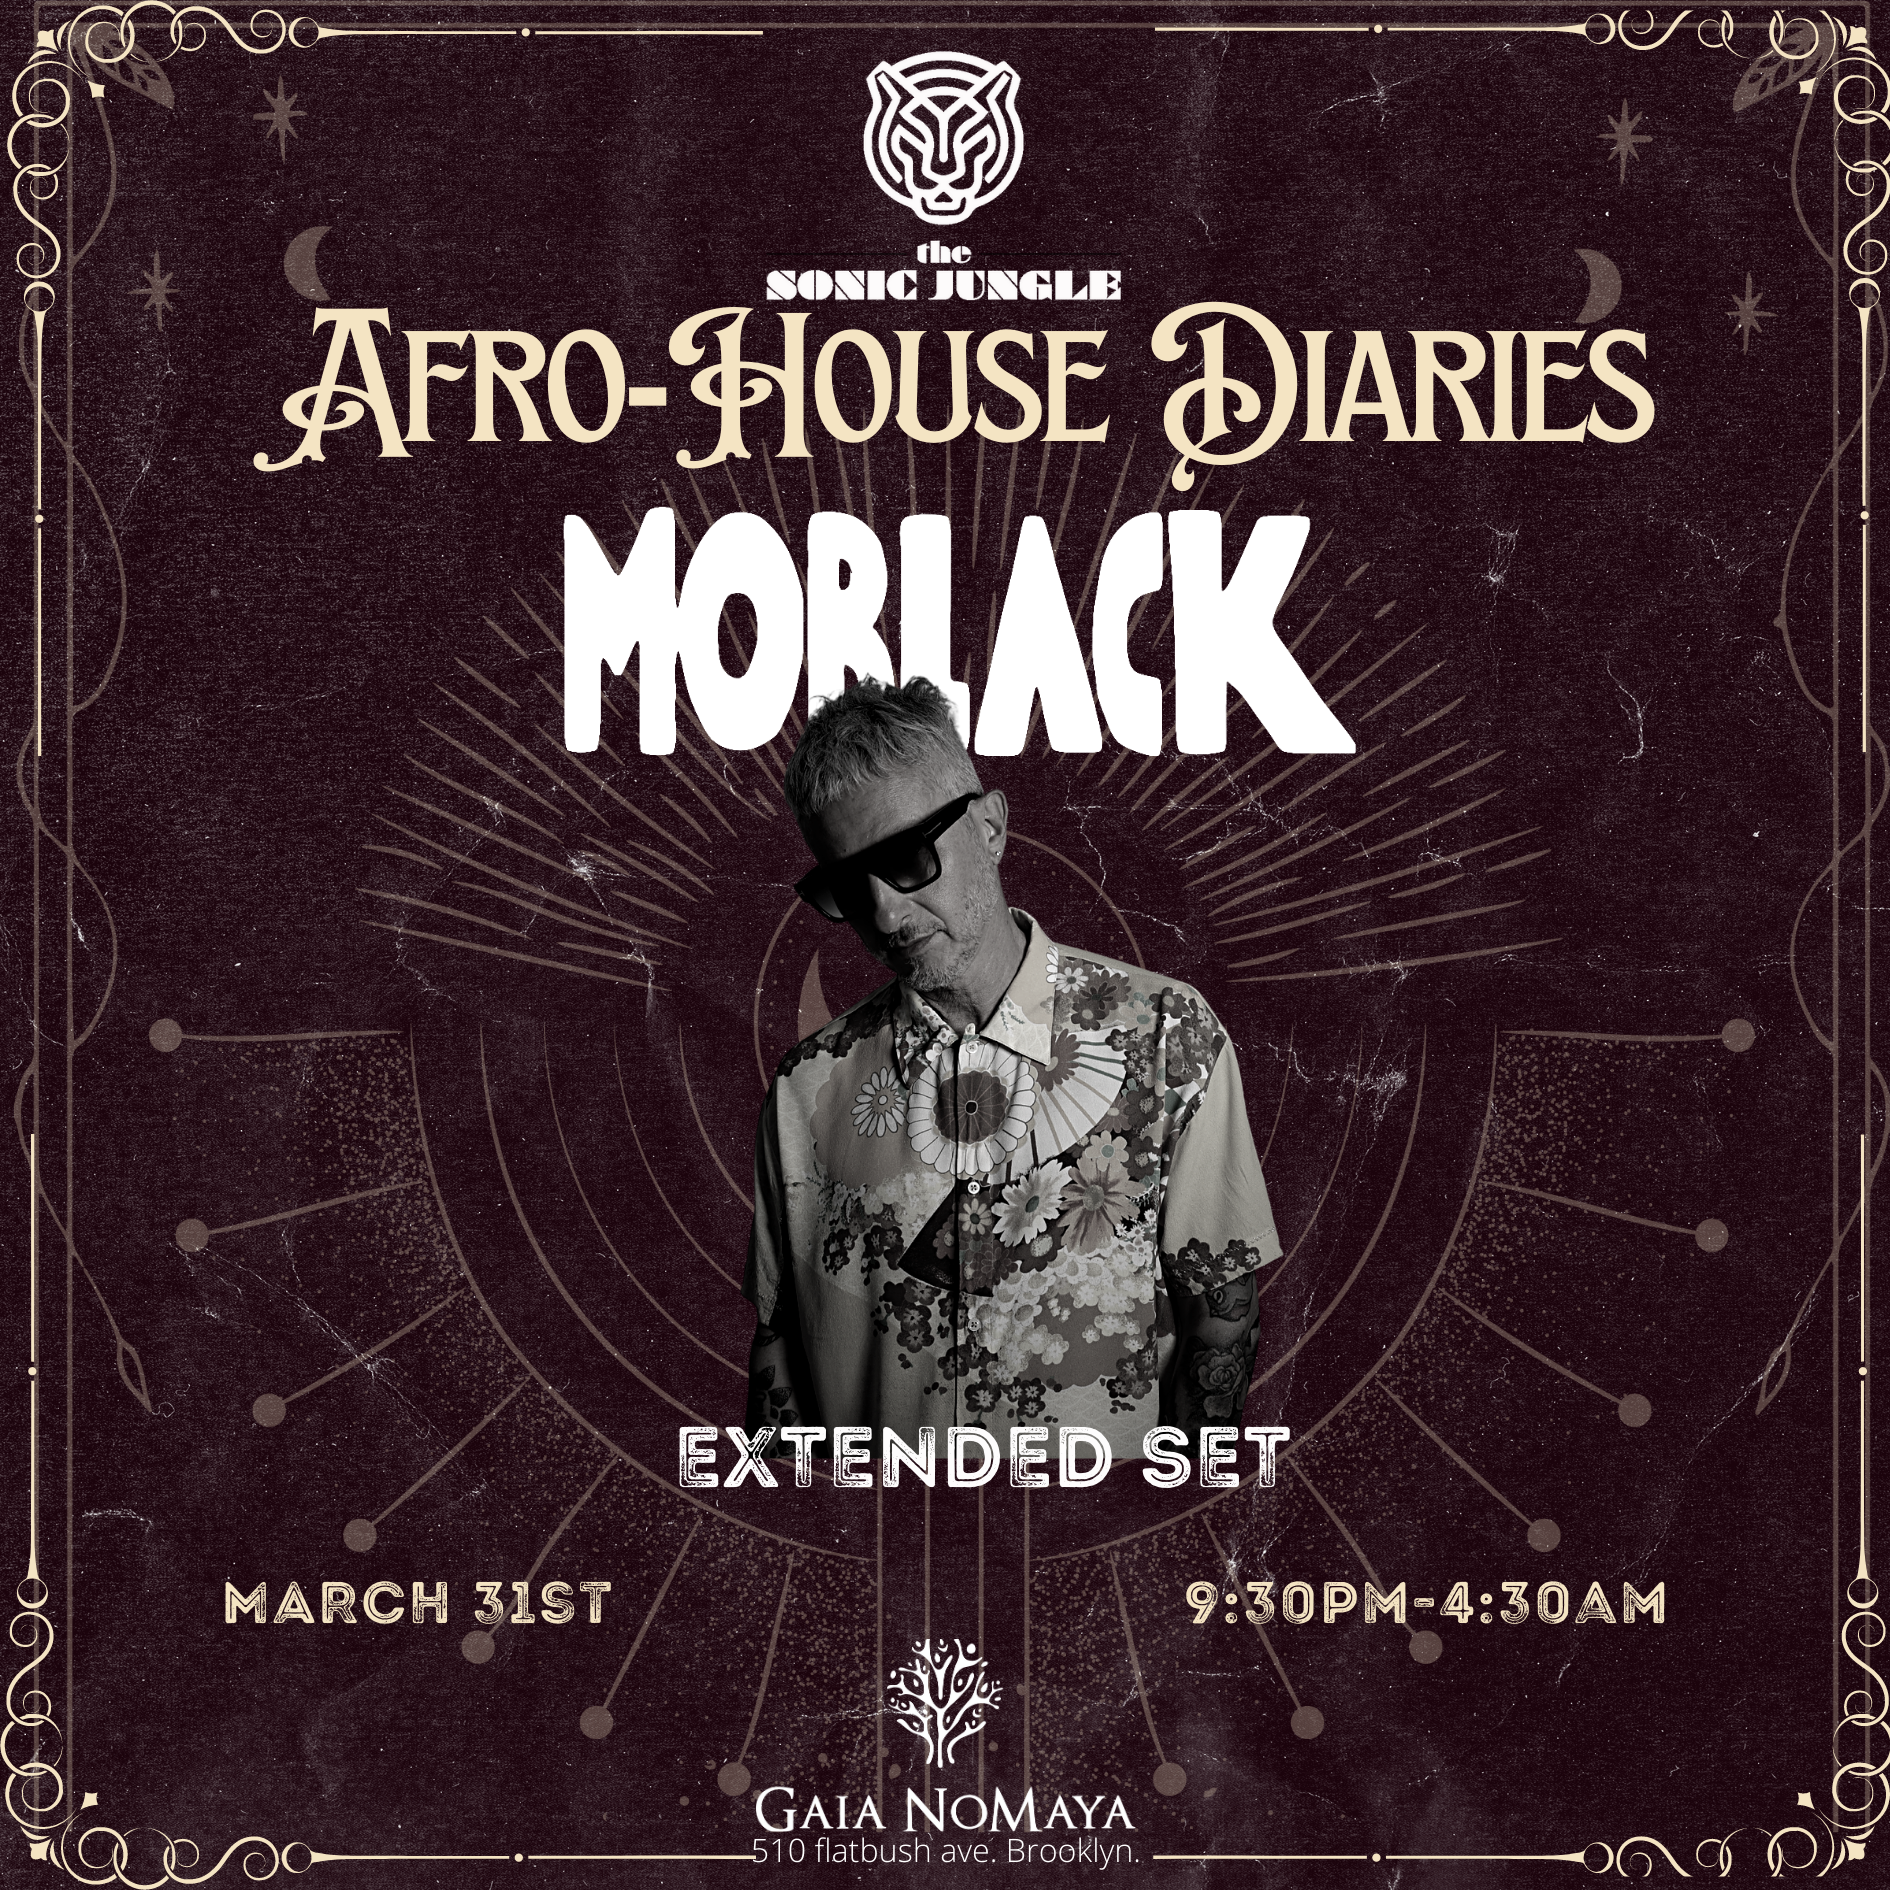 Afro-house Diaries with MoBlack - Página frontal